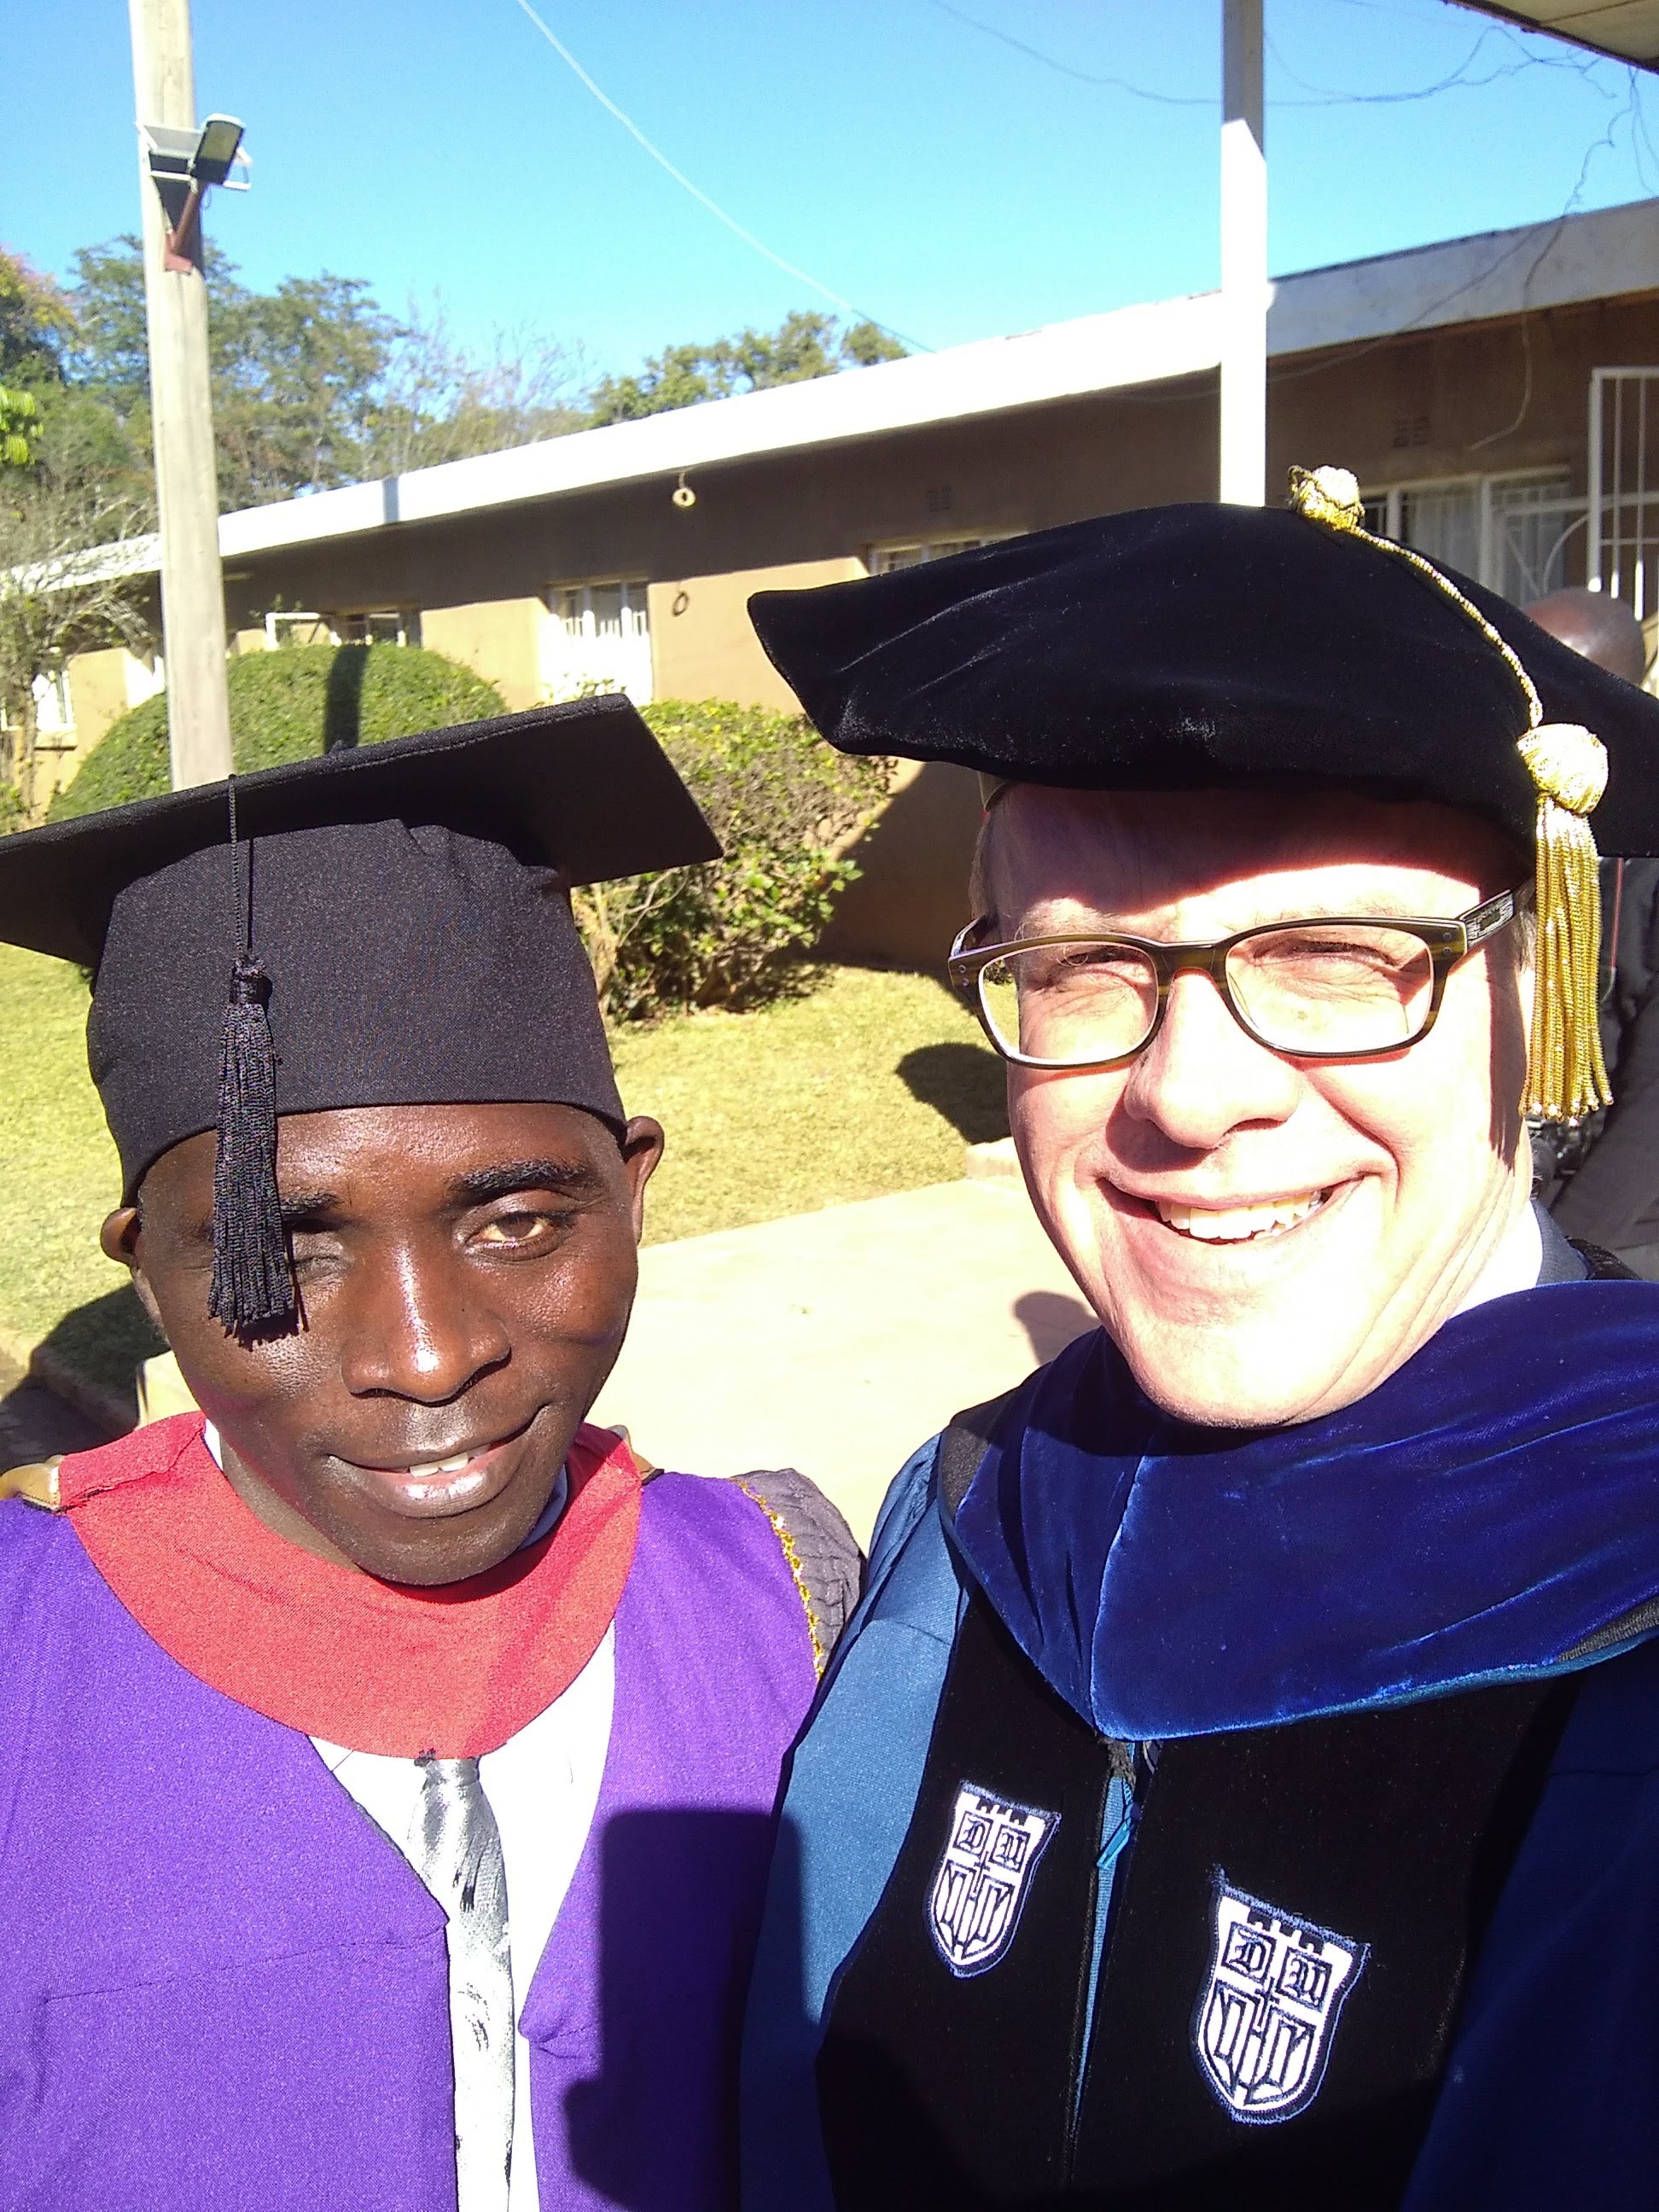 Dustin with Rev. Bannet Muwowo – currently the principal at Chasefu Theological College – celebrating Rev. Muwowo's 2018 masters degree graduation from Justo Mwale University.